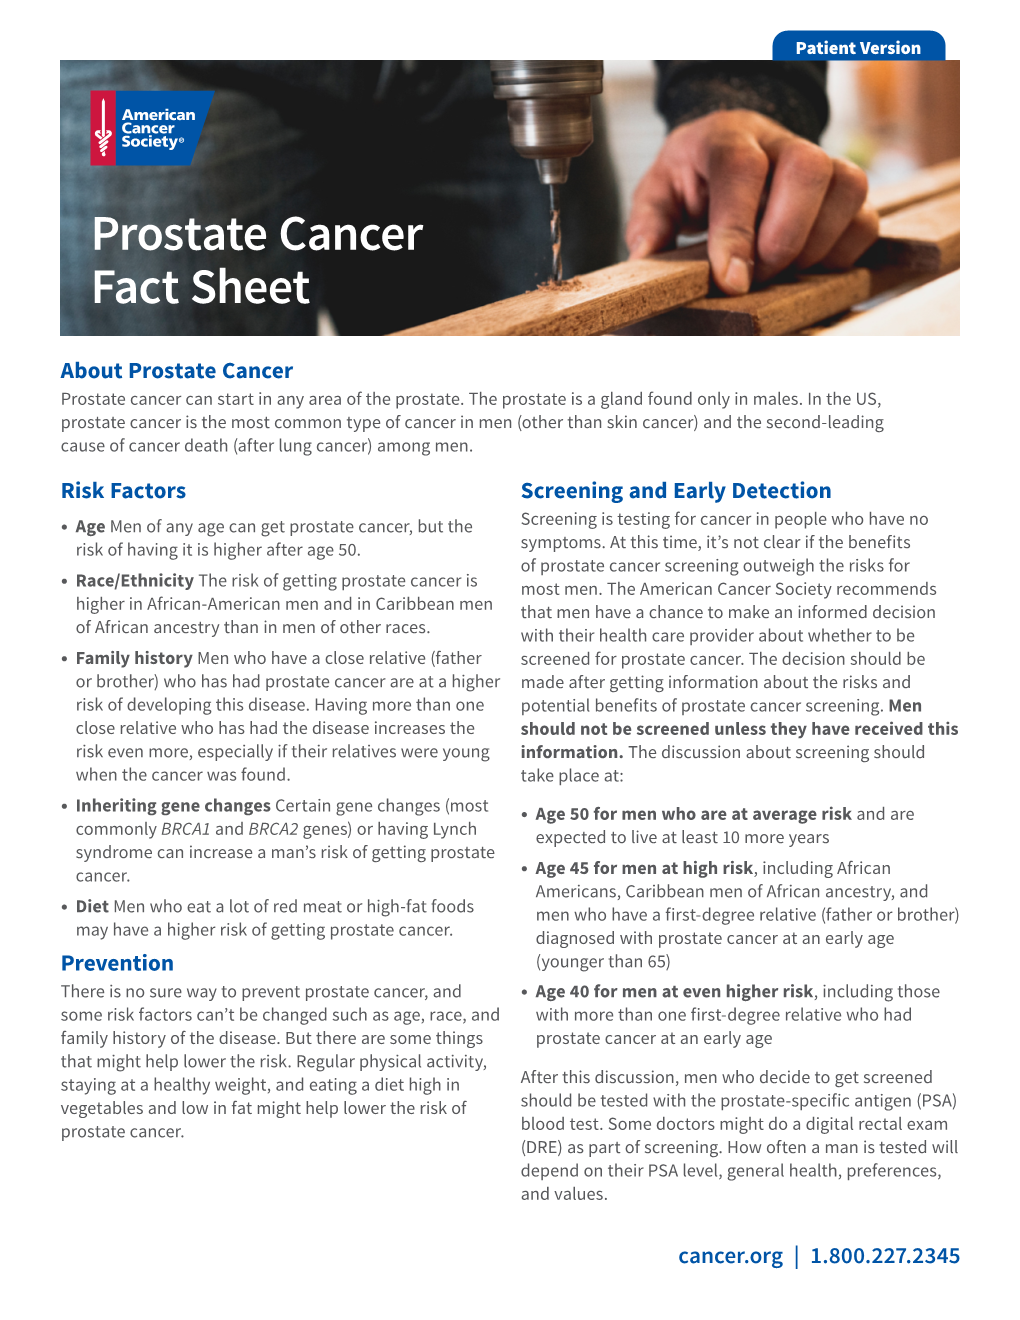 Prostate Cancer Fact Sheet